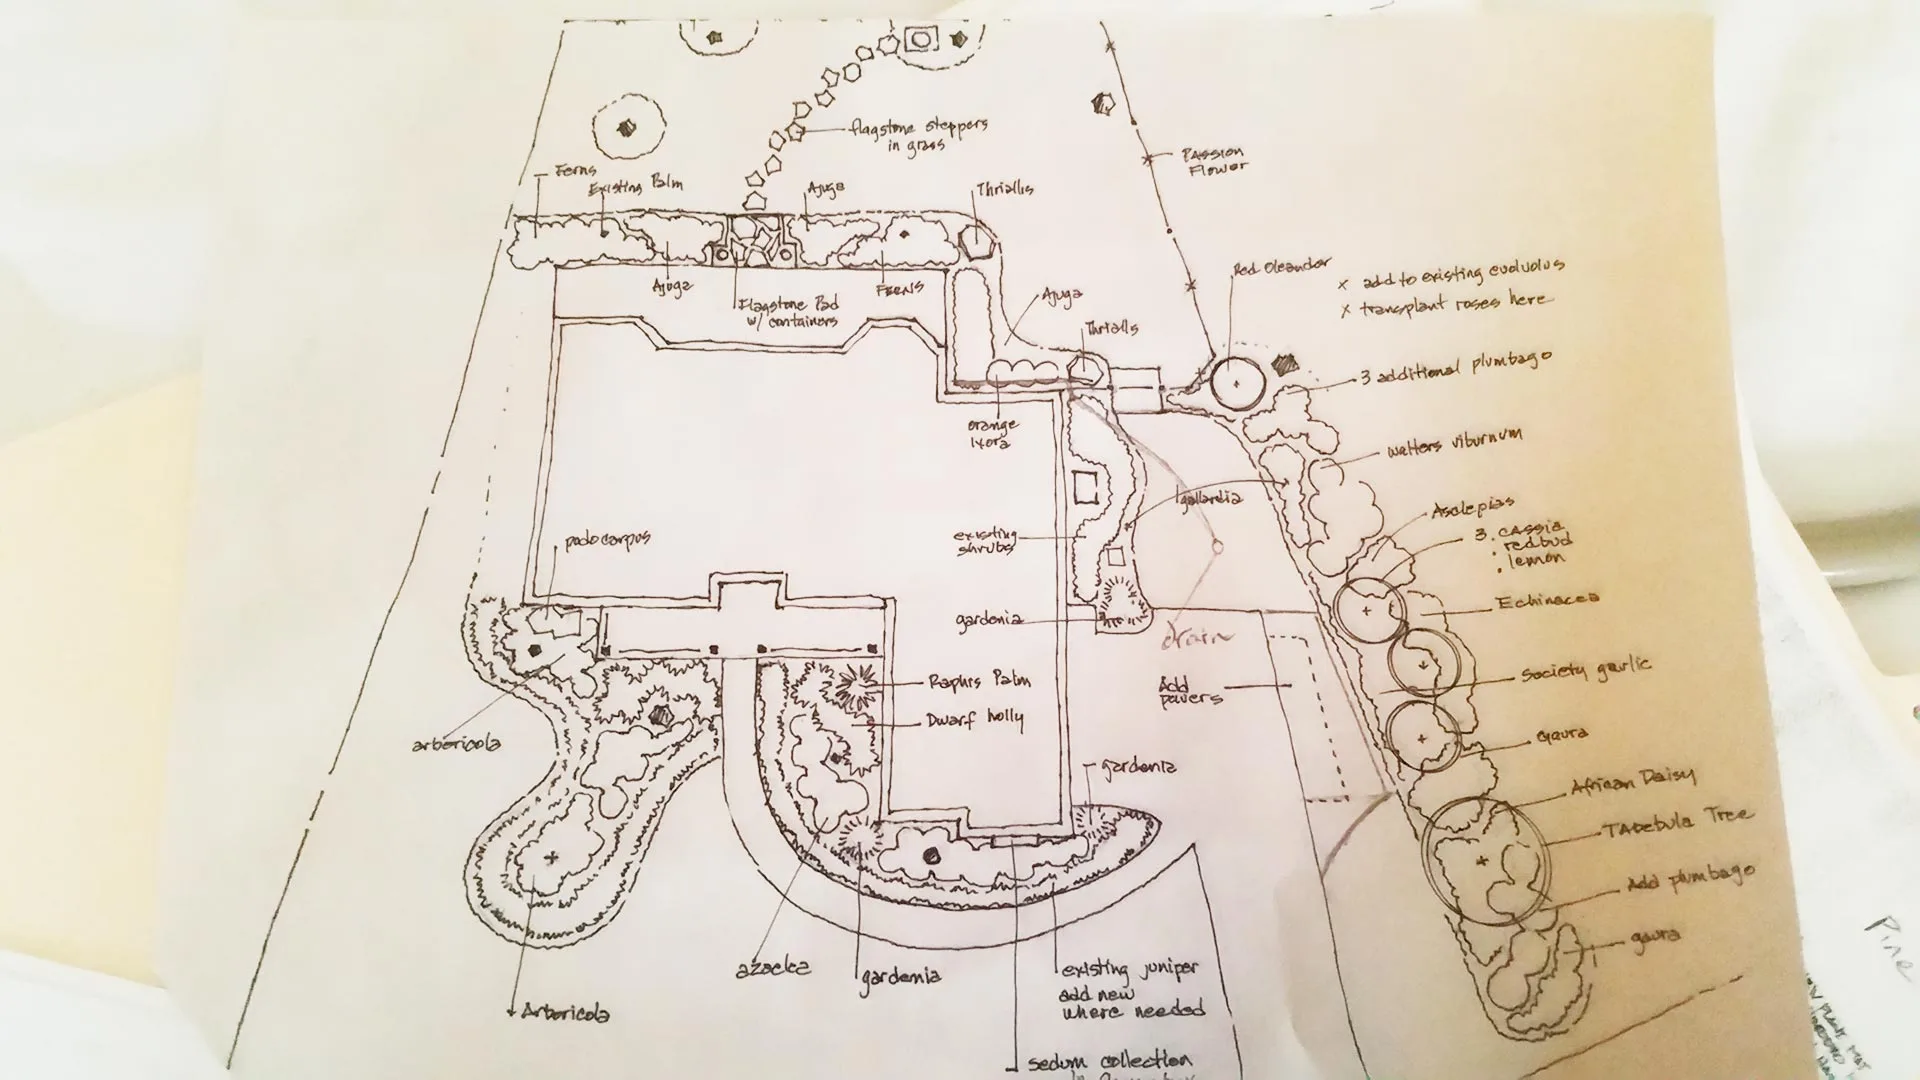 Our professionals are able to provide hand-drawn drawings to our landscape custom design customers.